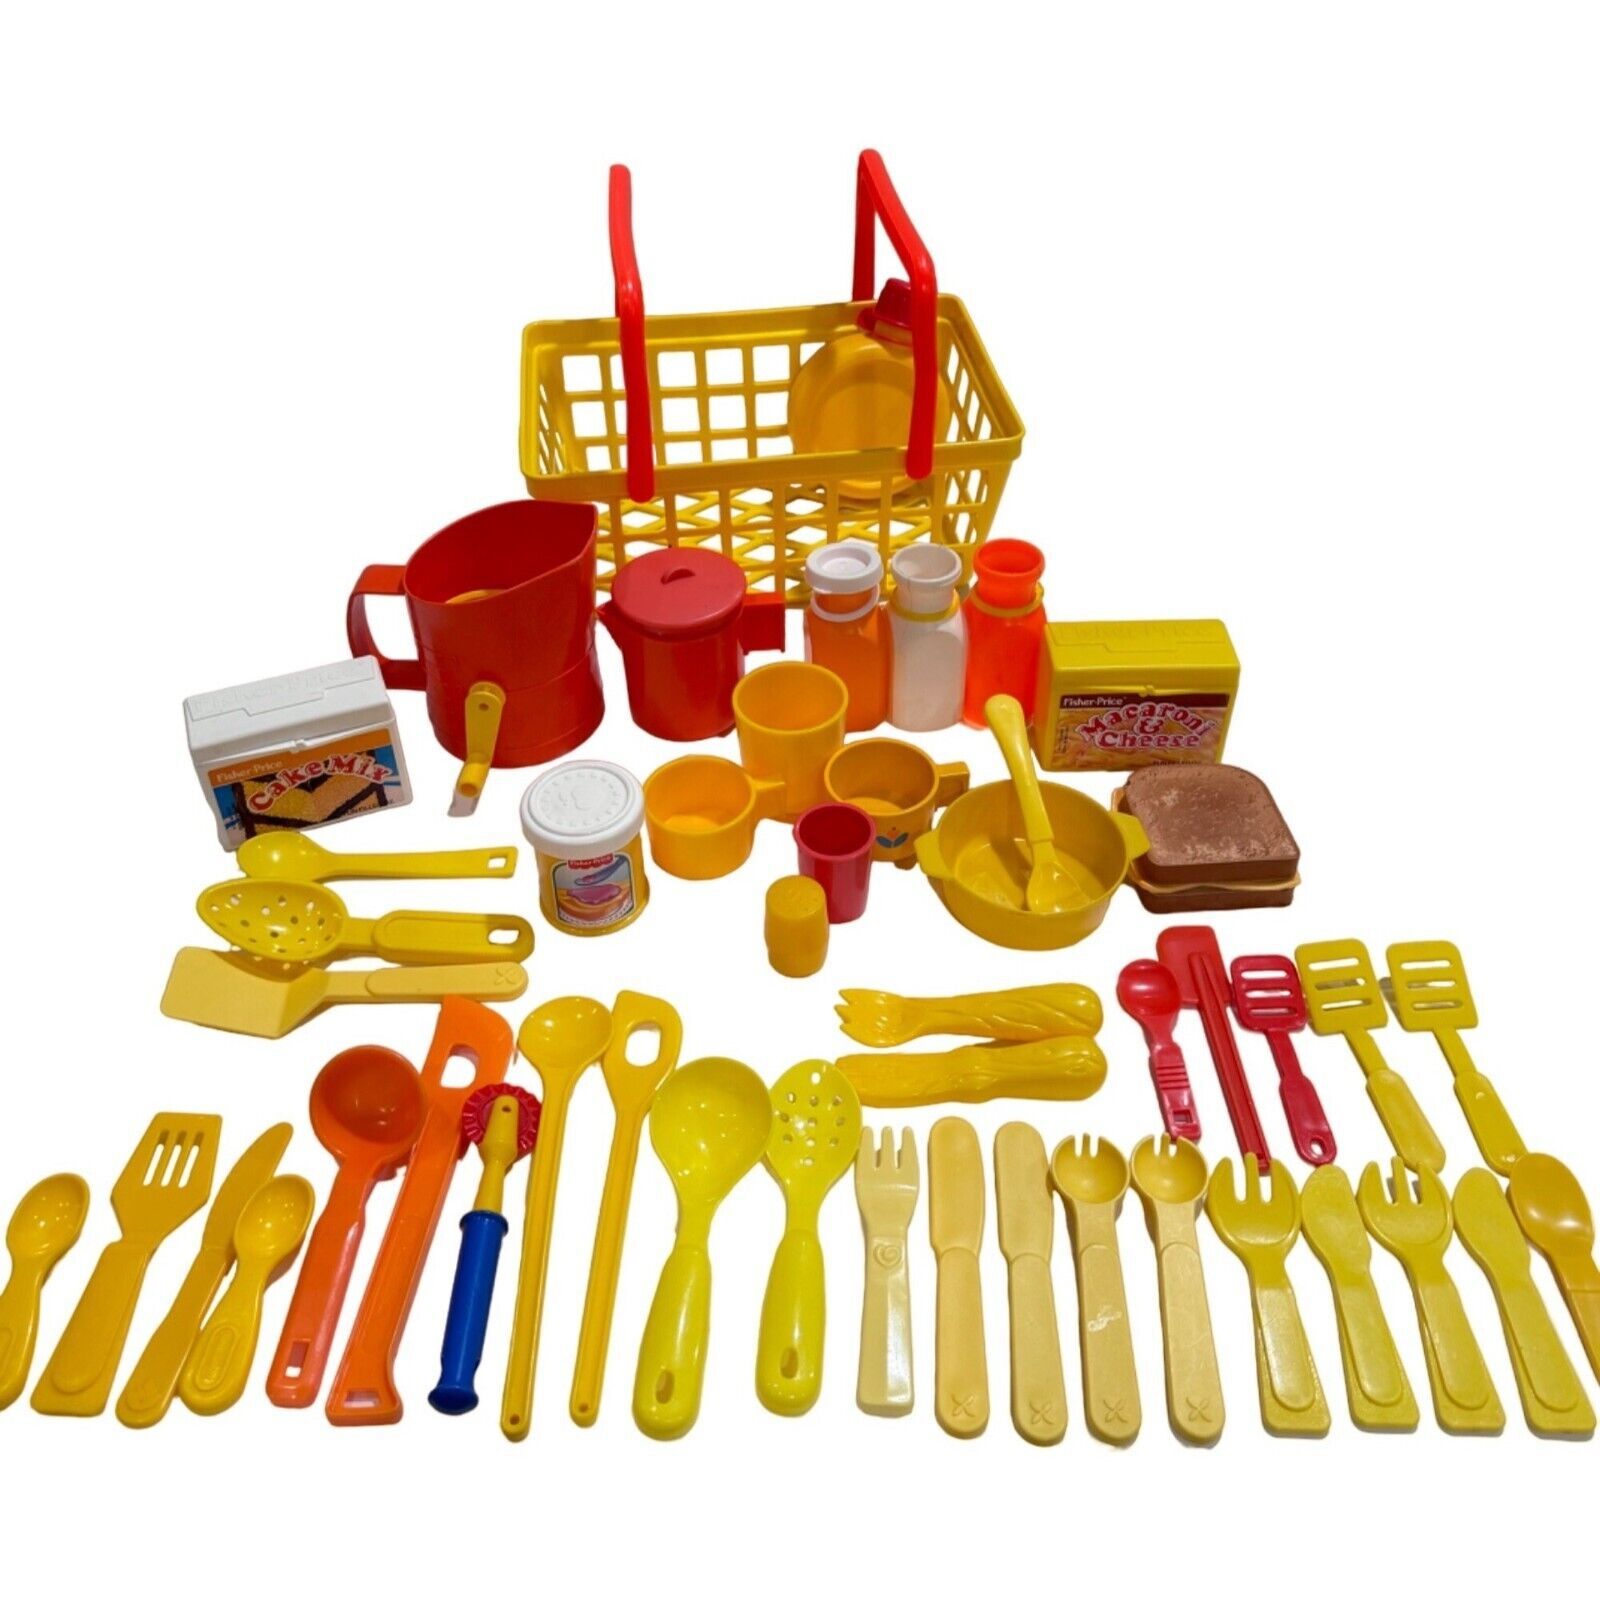 51 Vtg Fisher Price Fun With Food Play Food Grocery Basket Kitchen Pretend Play - $26.09